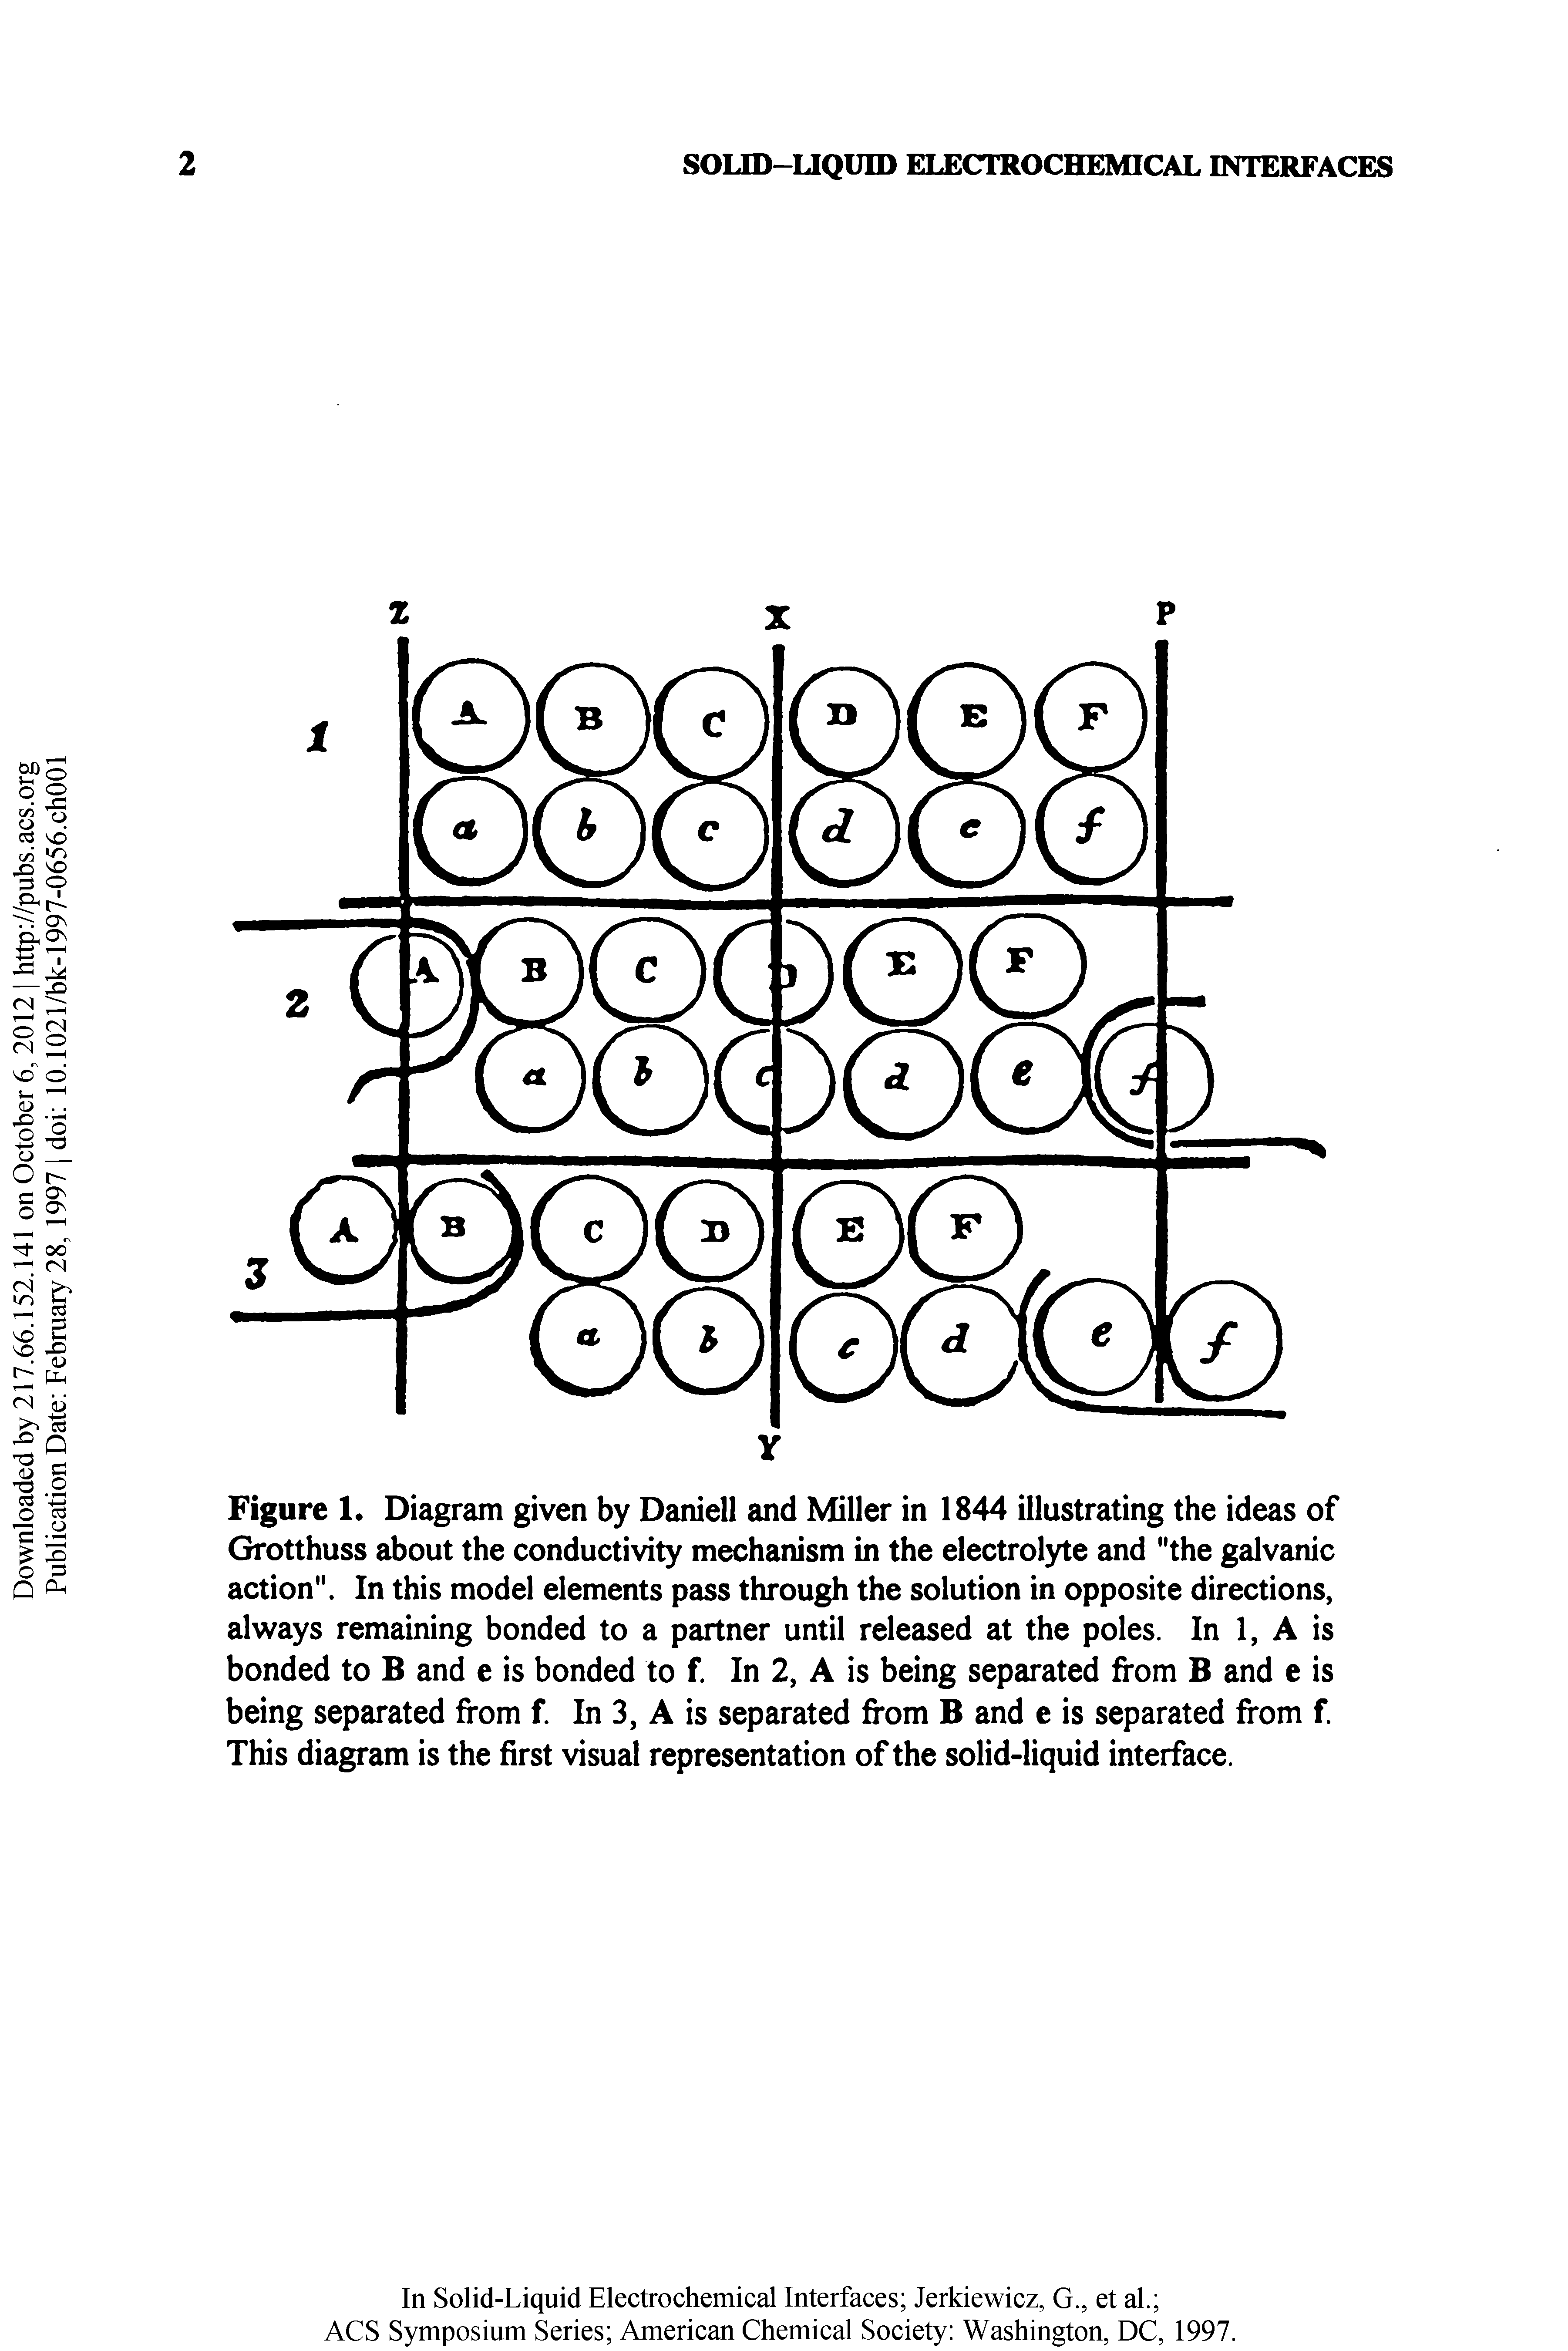 Figure 1. Diagram given by Daniell and Miller in 1844 illustrating the ideas of Grotthuss about the conductivity mechanism in the electrolyte and "the galvanic action". In this model elements pass through the solution in opposite directions, always remaining bonded to a partner until released at the poles. In 1, A is bonded to B and e is bonded to f. In 2, A is being separated from B and e is being separated from f. In 3, A is separated from B and e is separated from f This diagram is the first visual representation of the solid-liquid interface.